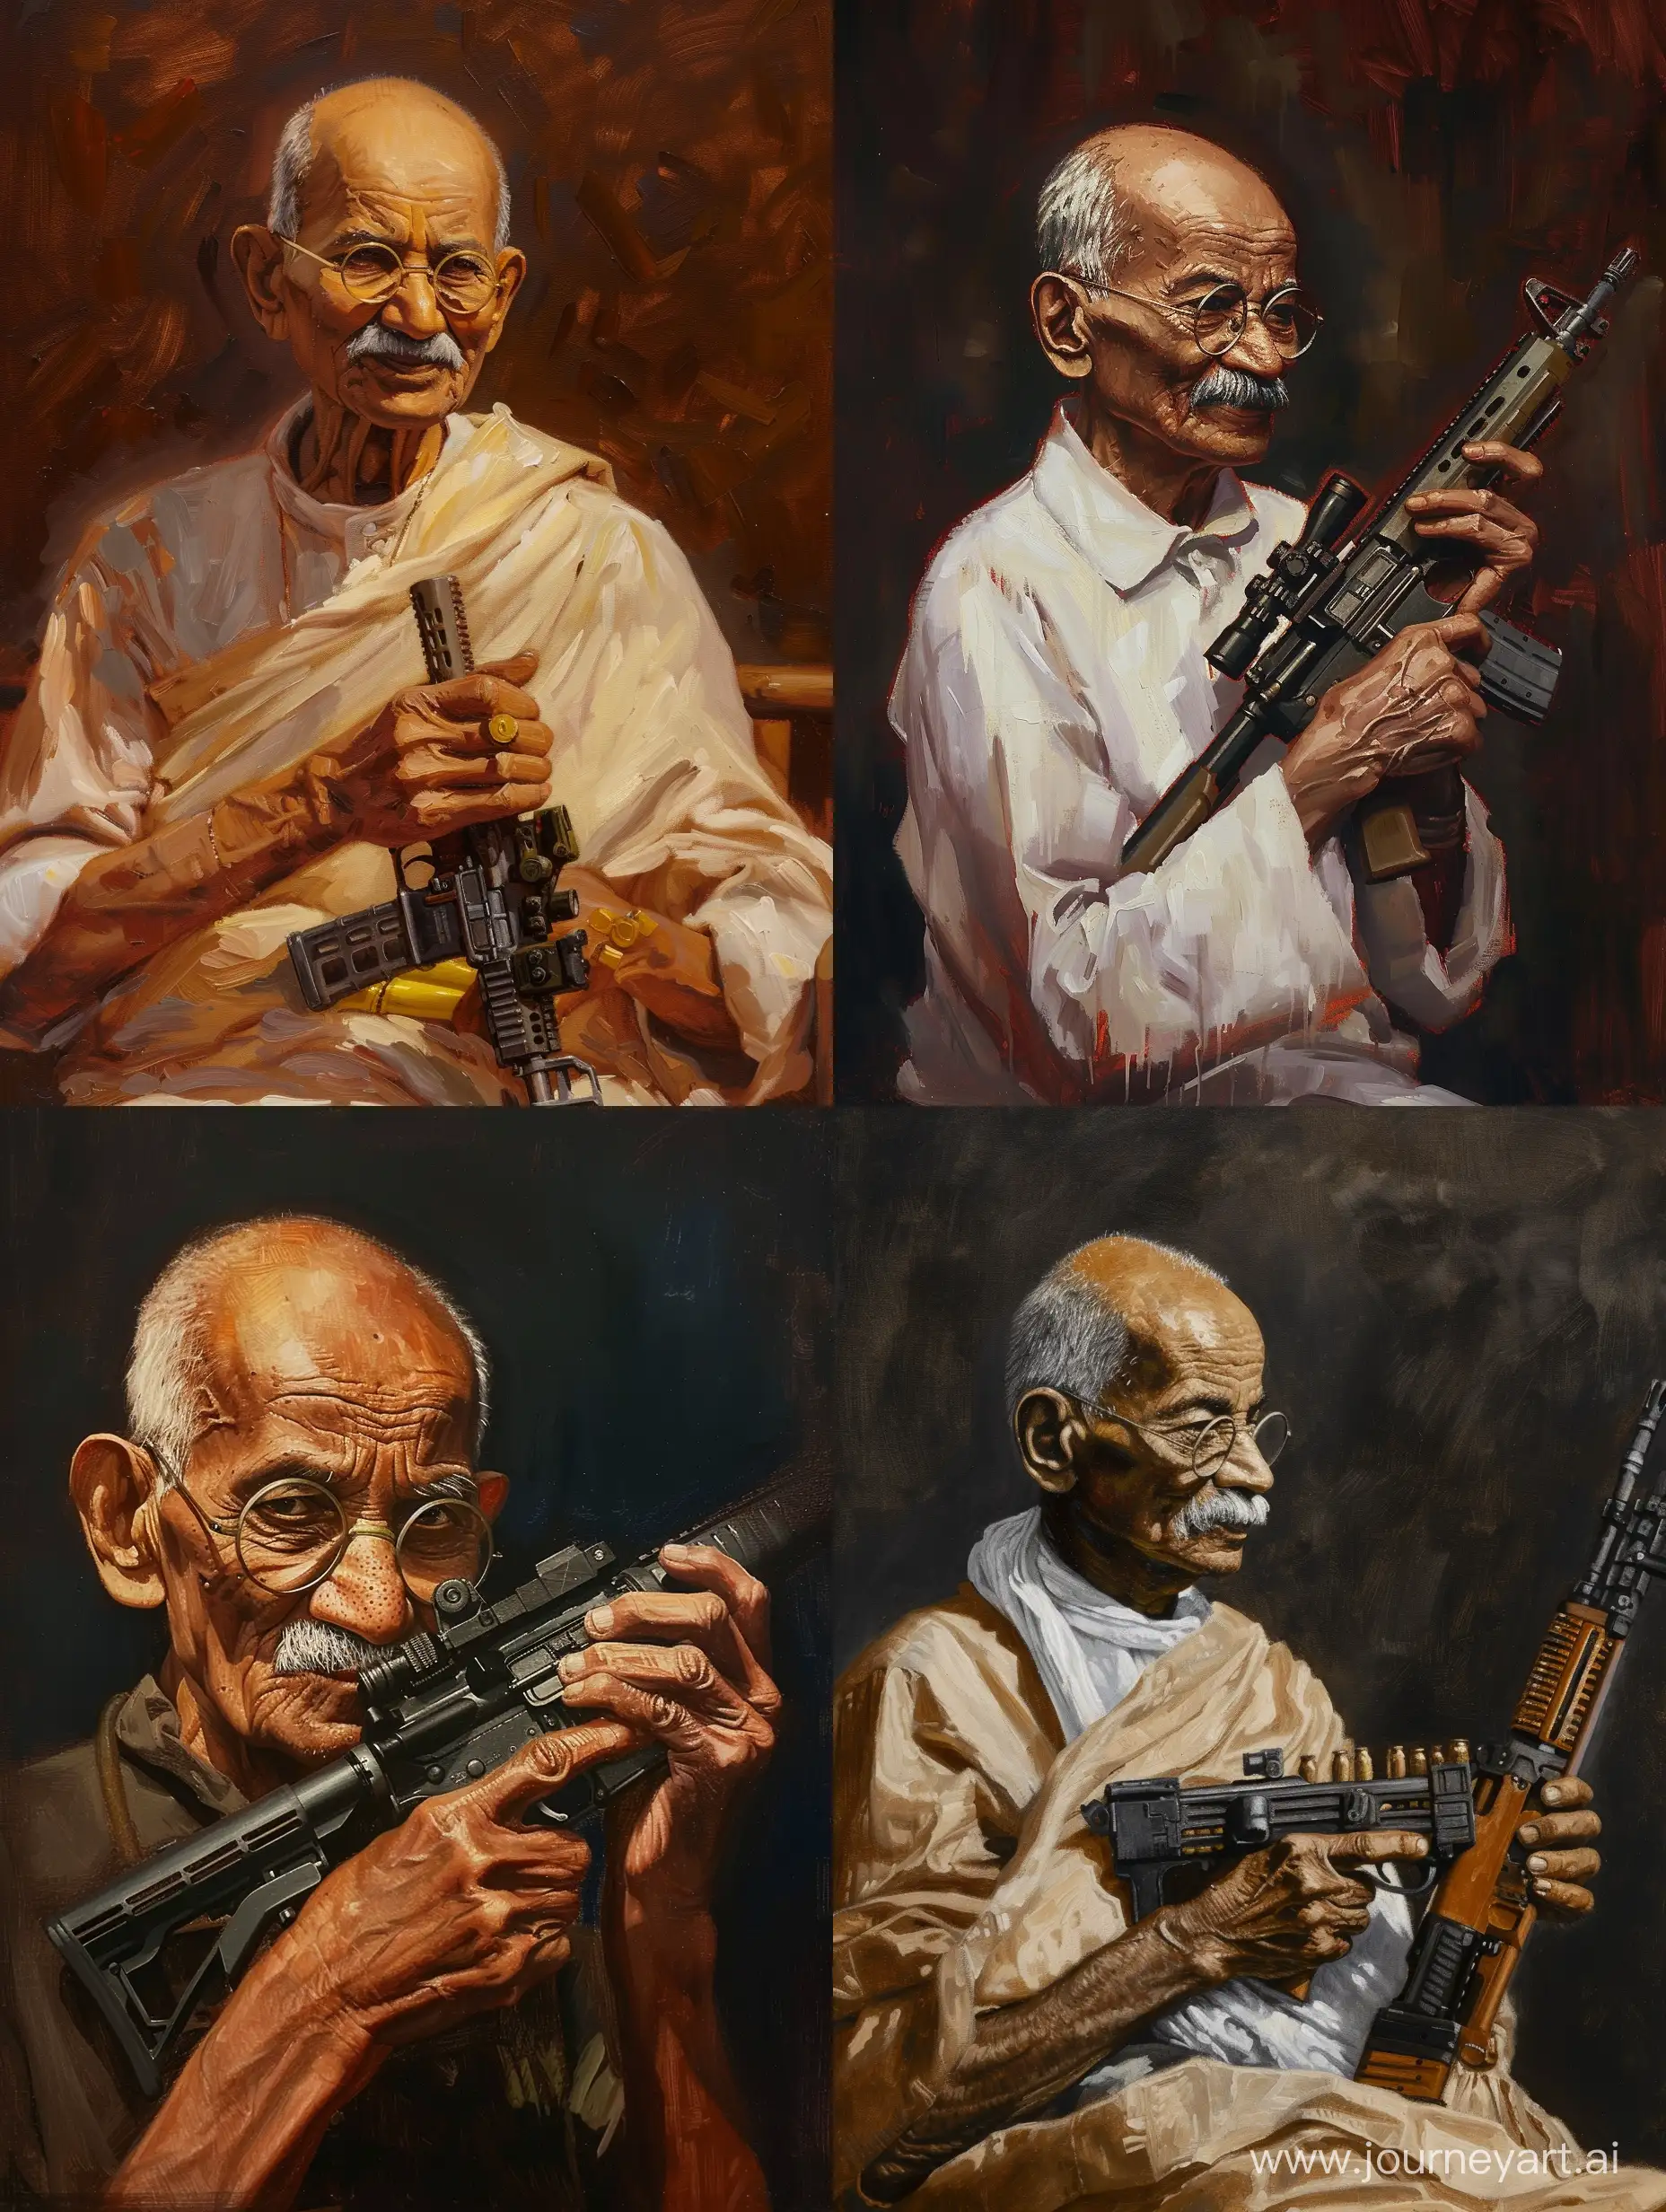 Mahatma-Gandhi-with-AR15-Powerful-Symbolism-in-an-Oil-Painting